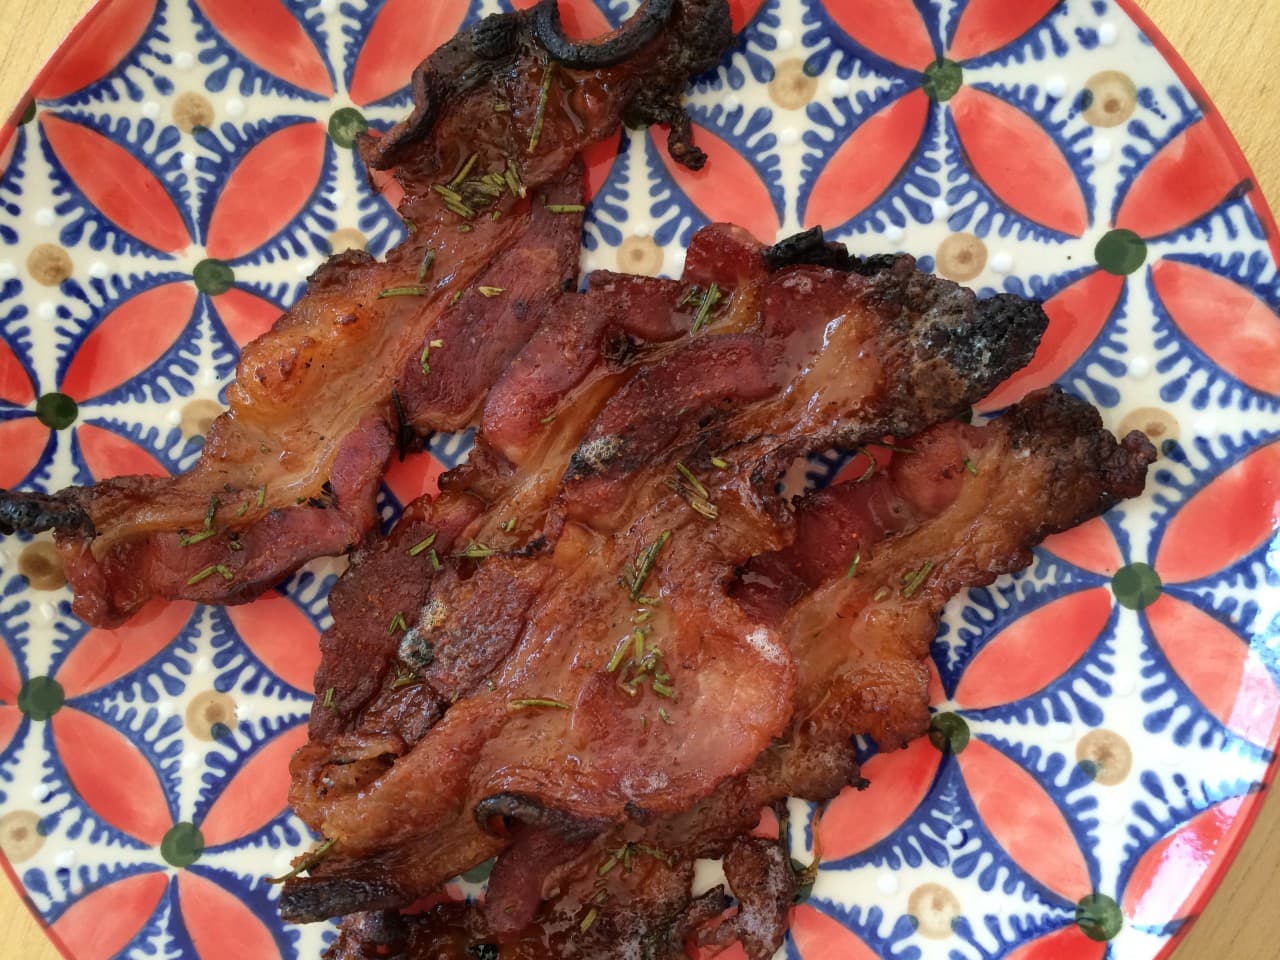 "Maple-Glazed Bacon with Rosemary and Chile Powder" (Kathy Gunst/Here & Now)